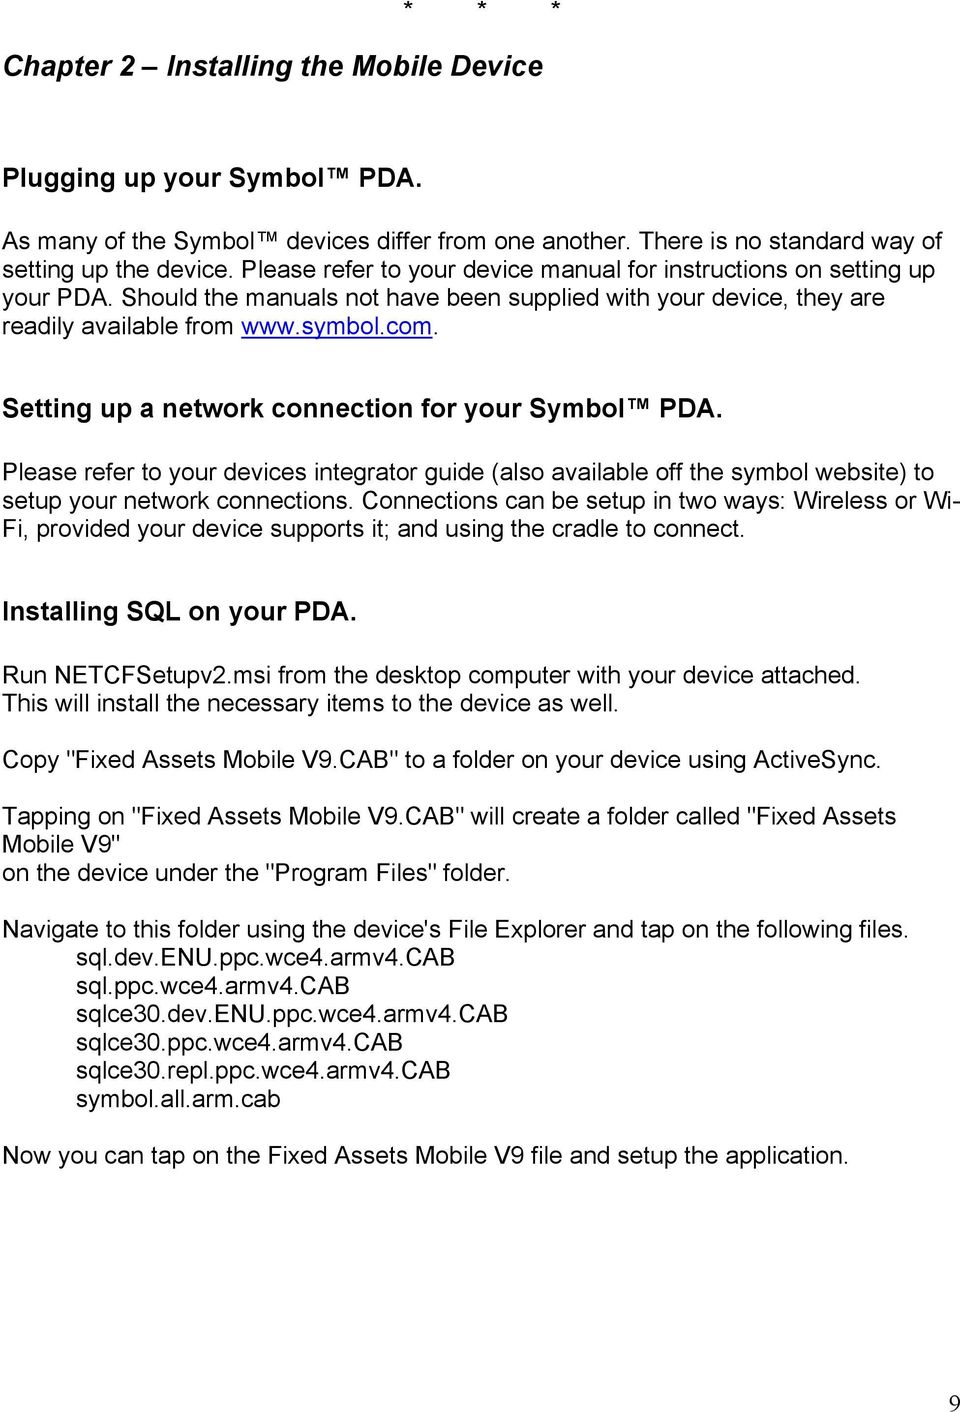 Setting up a network connection for your Symbol PDA. Please refer to your devices integrator guide (also available off the symbol website) to setup your network connections.